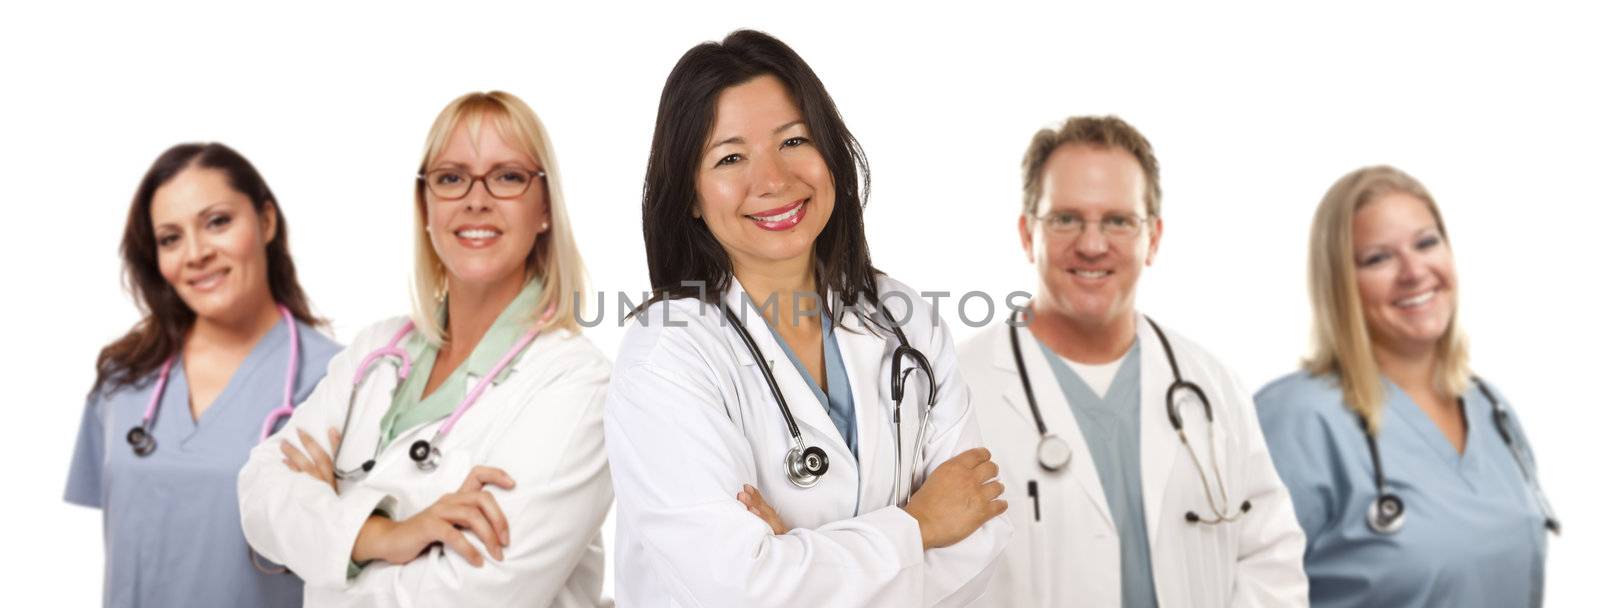 Friendly Hispanic Female Doctor and Colleagues Isolated on a White Background.